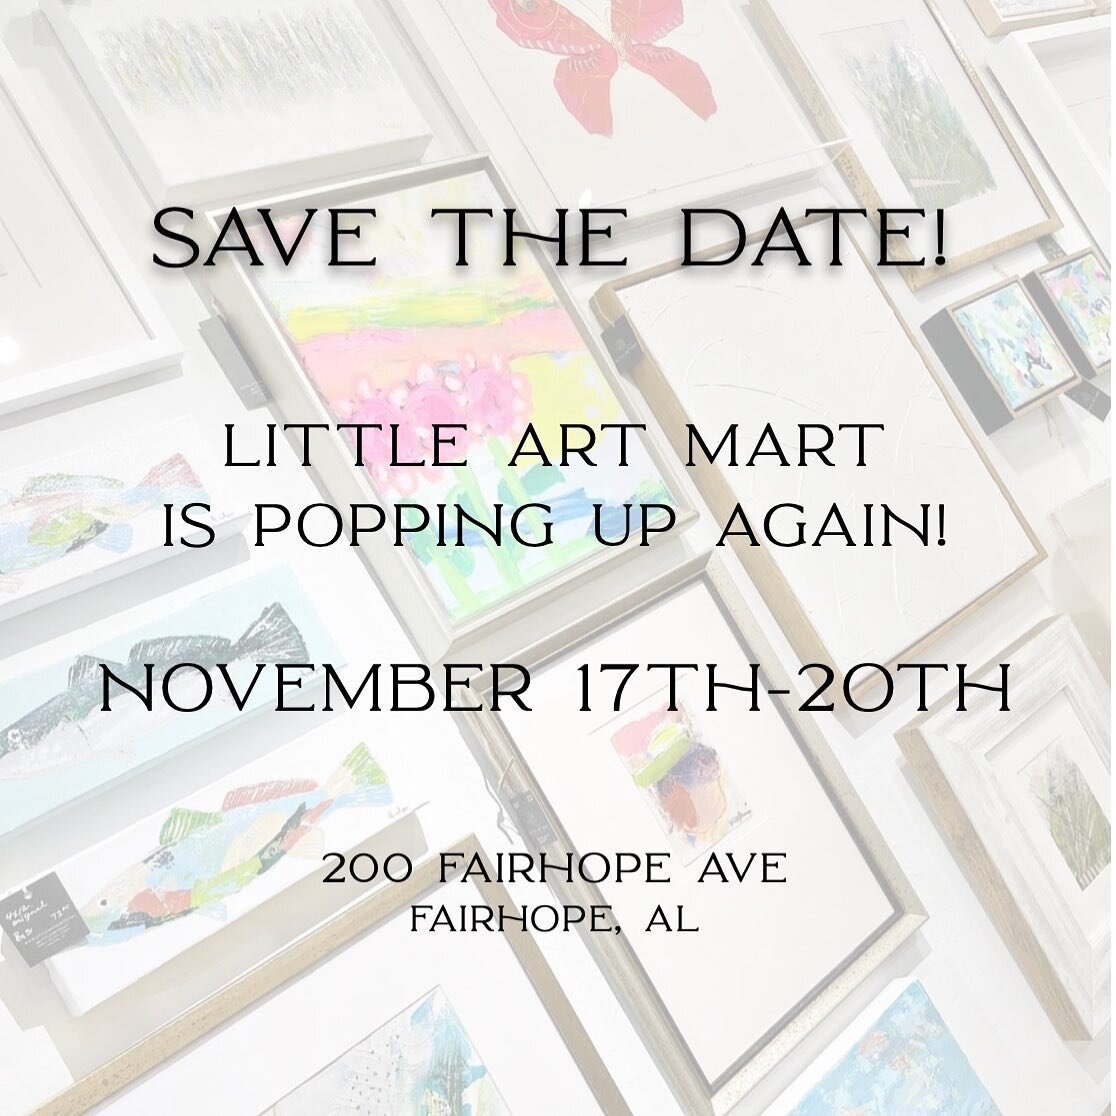 Little Art Mart is POPPING UP again!! 

That&rsquo;s right friends, we&rsquo;re finally reopening our doors for the holiday shopping but SAVE THE DATE because we won&rsquo;t be around long! We will be open FOUR DAYS - Thursday, Nov 17th through Sunda